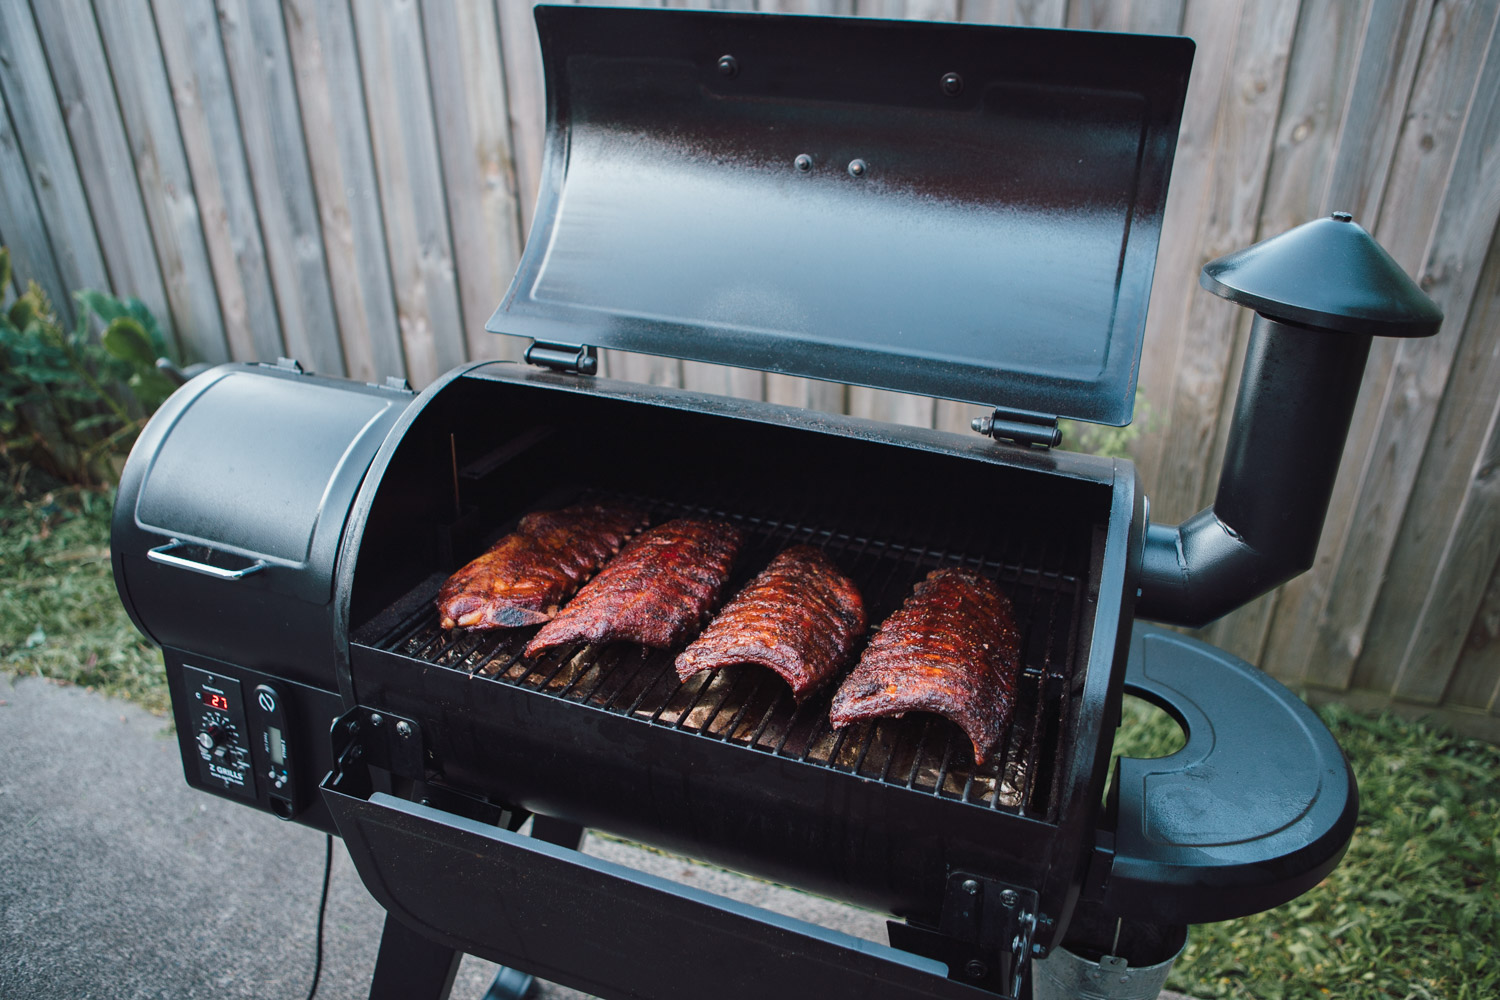 Summen Mus Gøre klart Save Up to 46% on a Great Pellet Grill from Z Grills